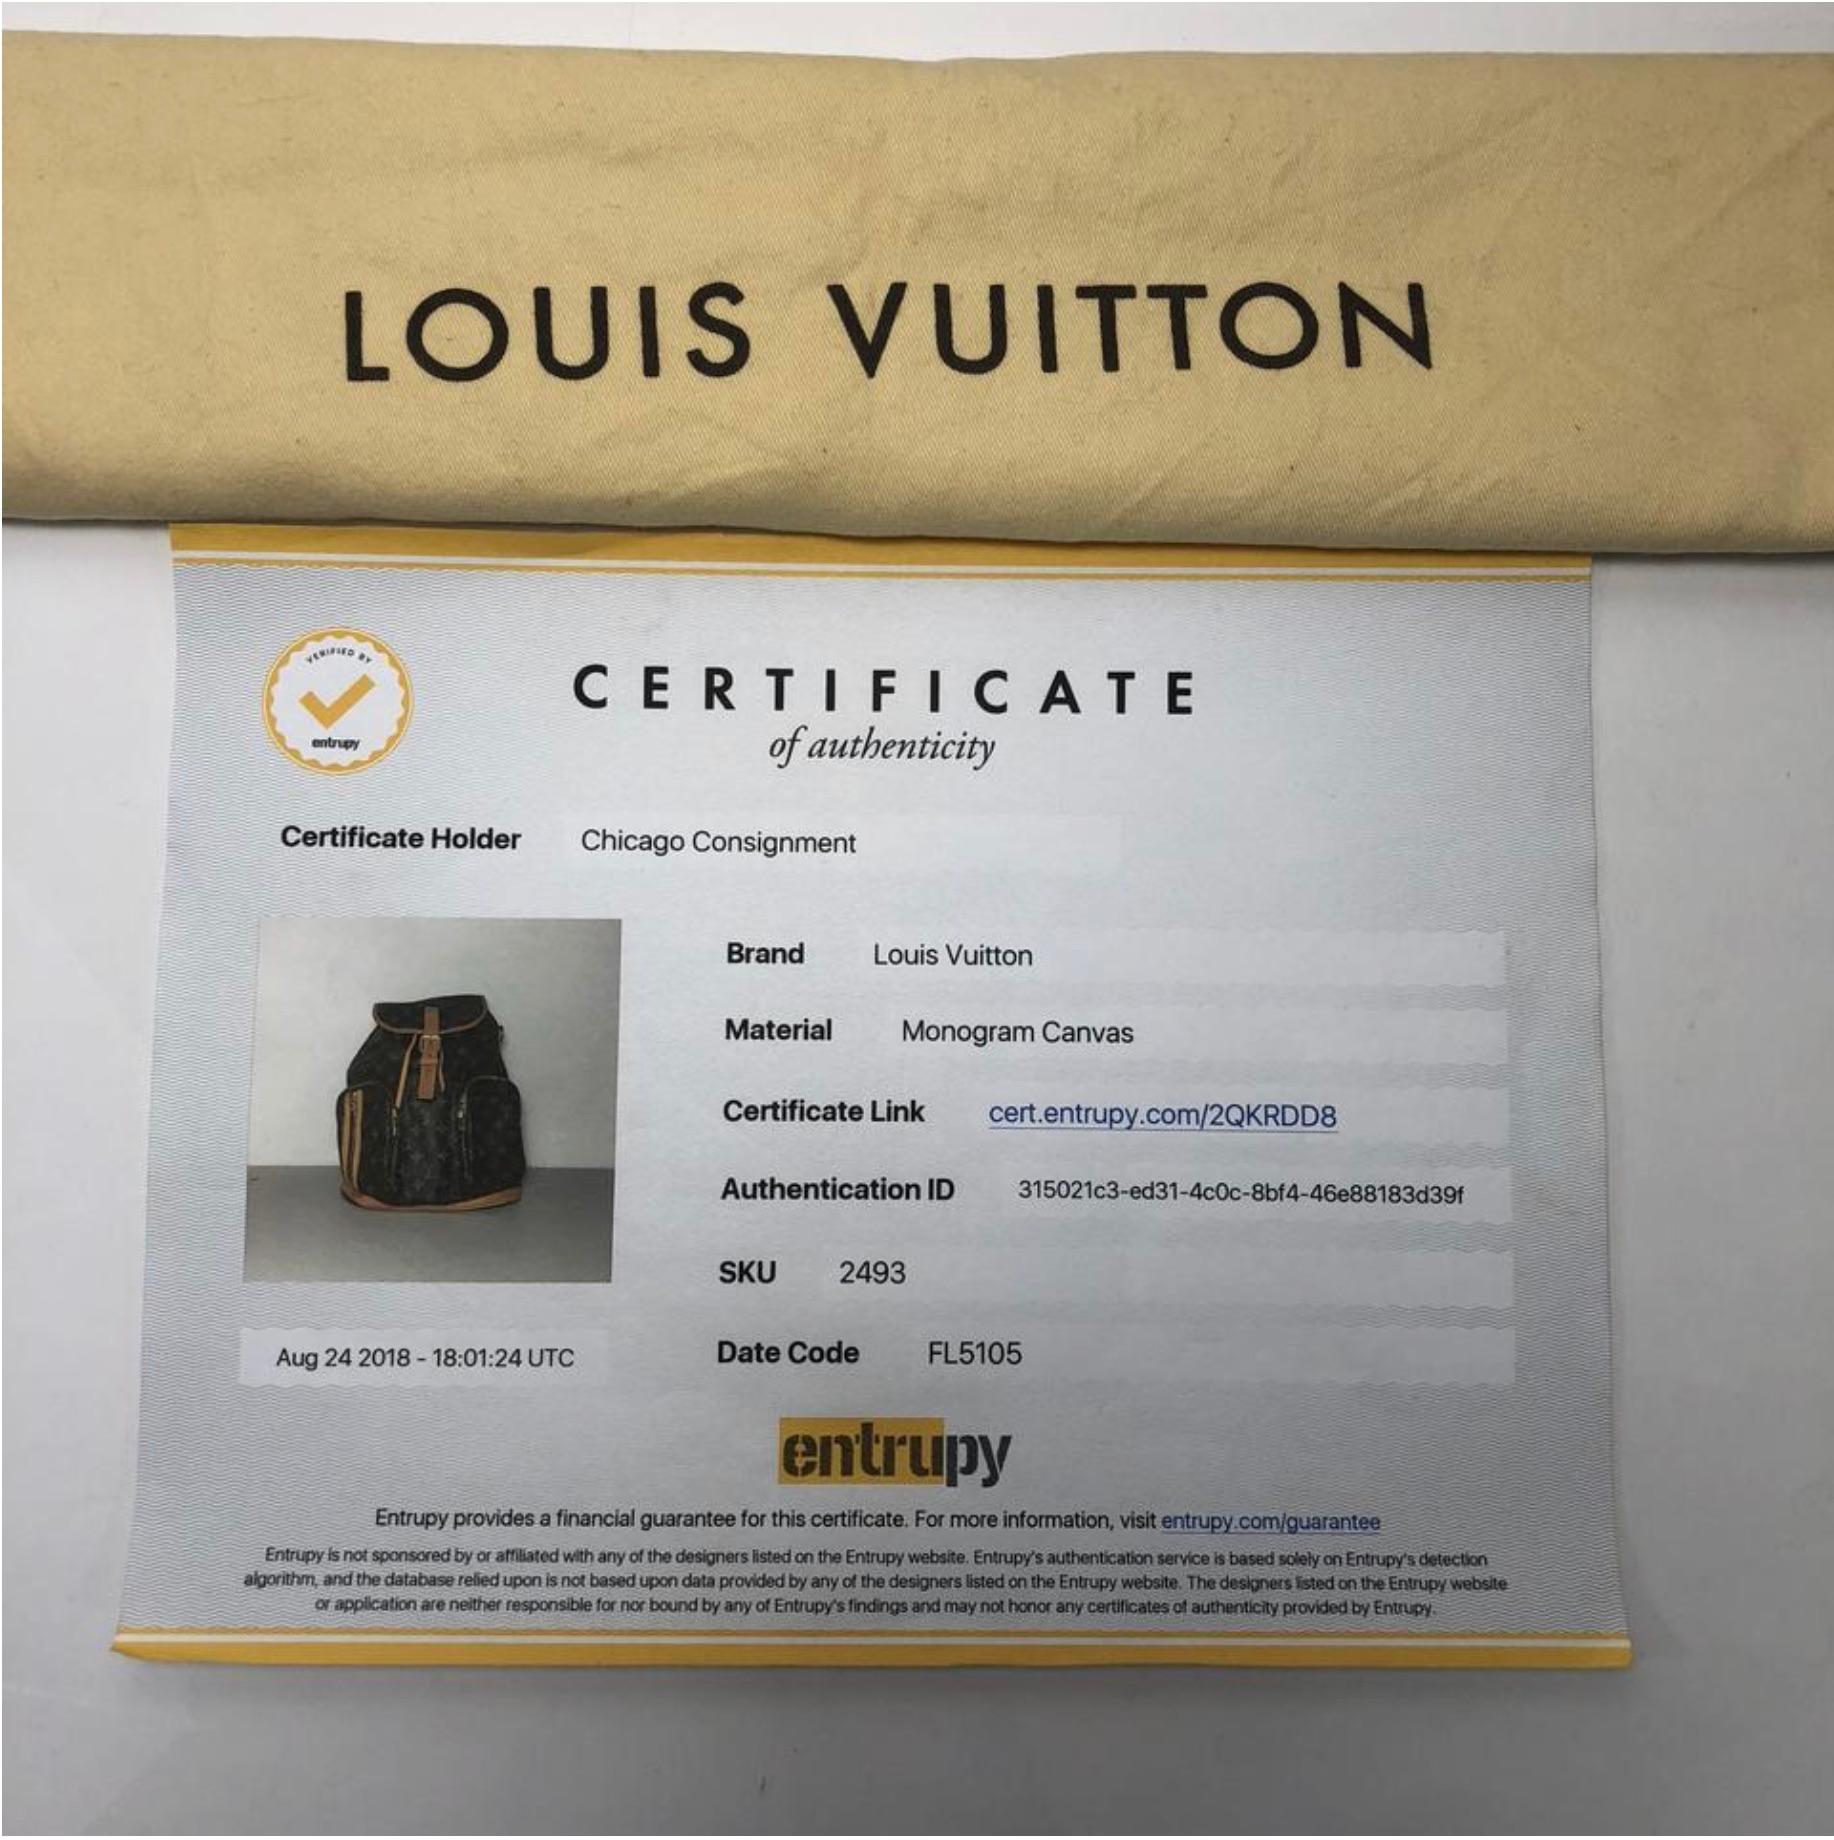 MODEL - Louis Vuitton Monogram Bosphore Backpack

CONDITION - Exceptional. Light vachette with light water marks and color transfer, darkened trim under flap closure, no dryness and no cracking. Bright and shiny hardware with no tarnishing or